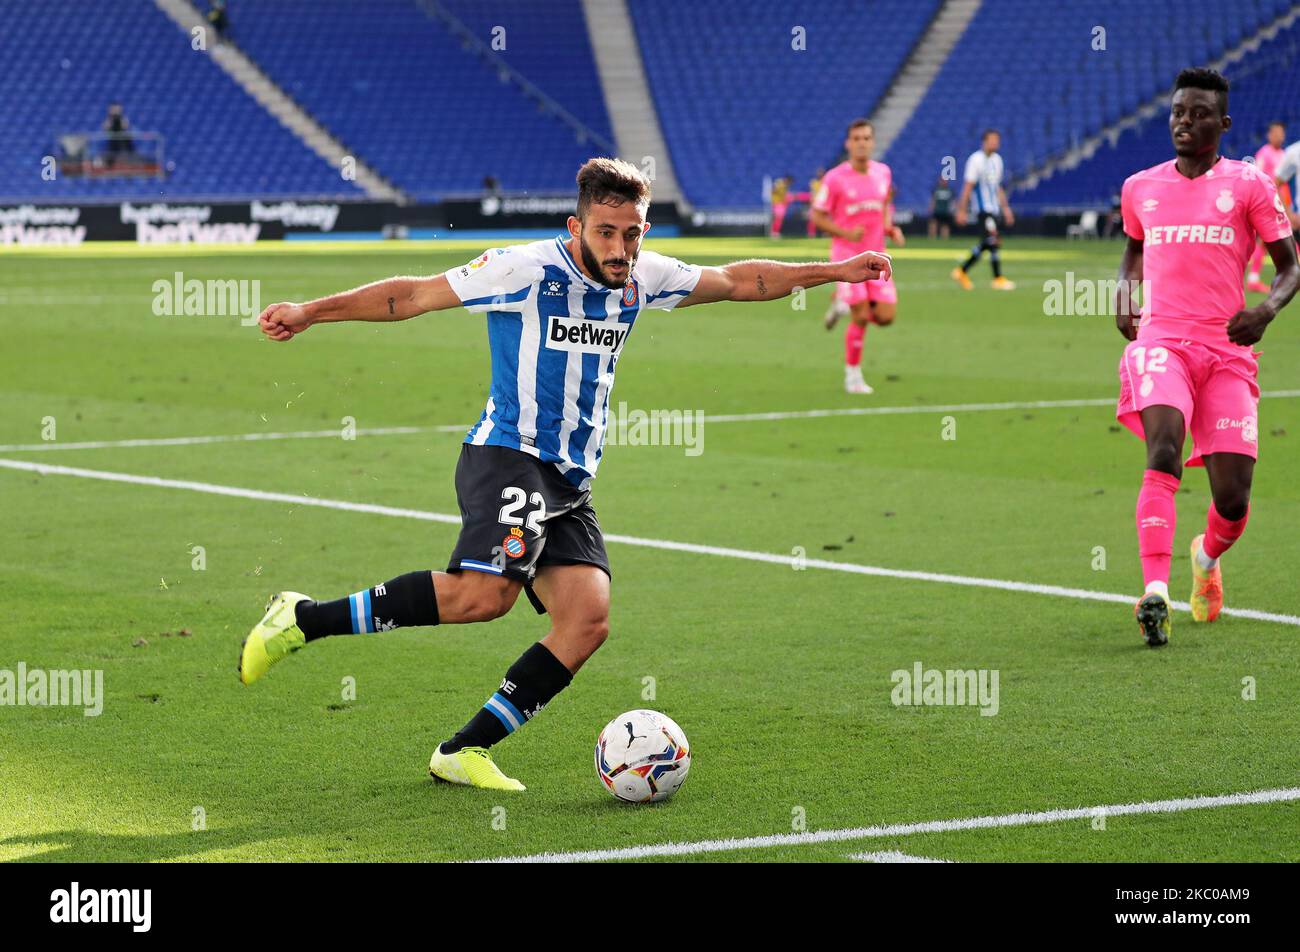 Matias Vargas during the match between RCD Espanyol and RCD Mallorca, corresponding to que week 2 of the Liga Smartbank, played at the RCDE Stadium, on 20th September 2020, in Barcelona, Spain. -- (Photo by Urbanandsport/NurPhoto) Stock Photo